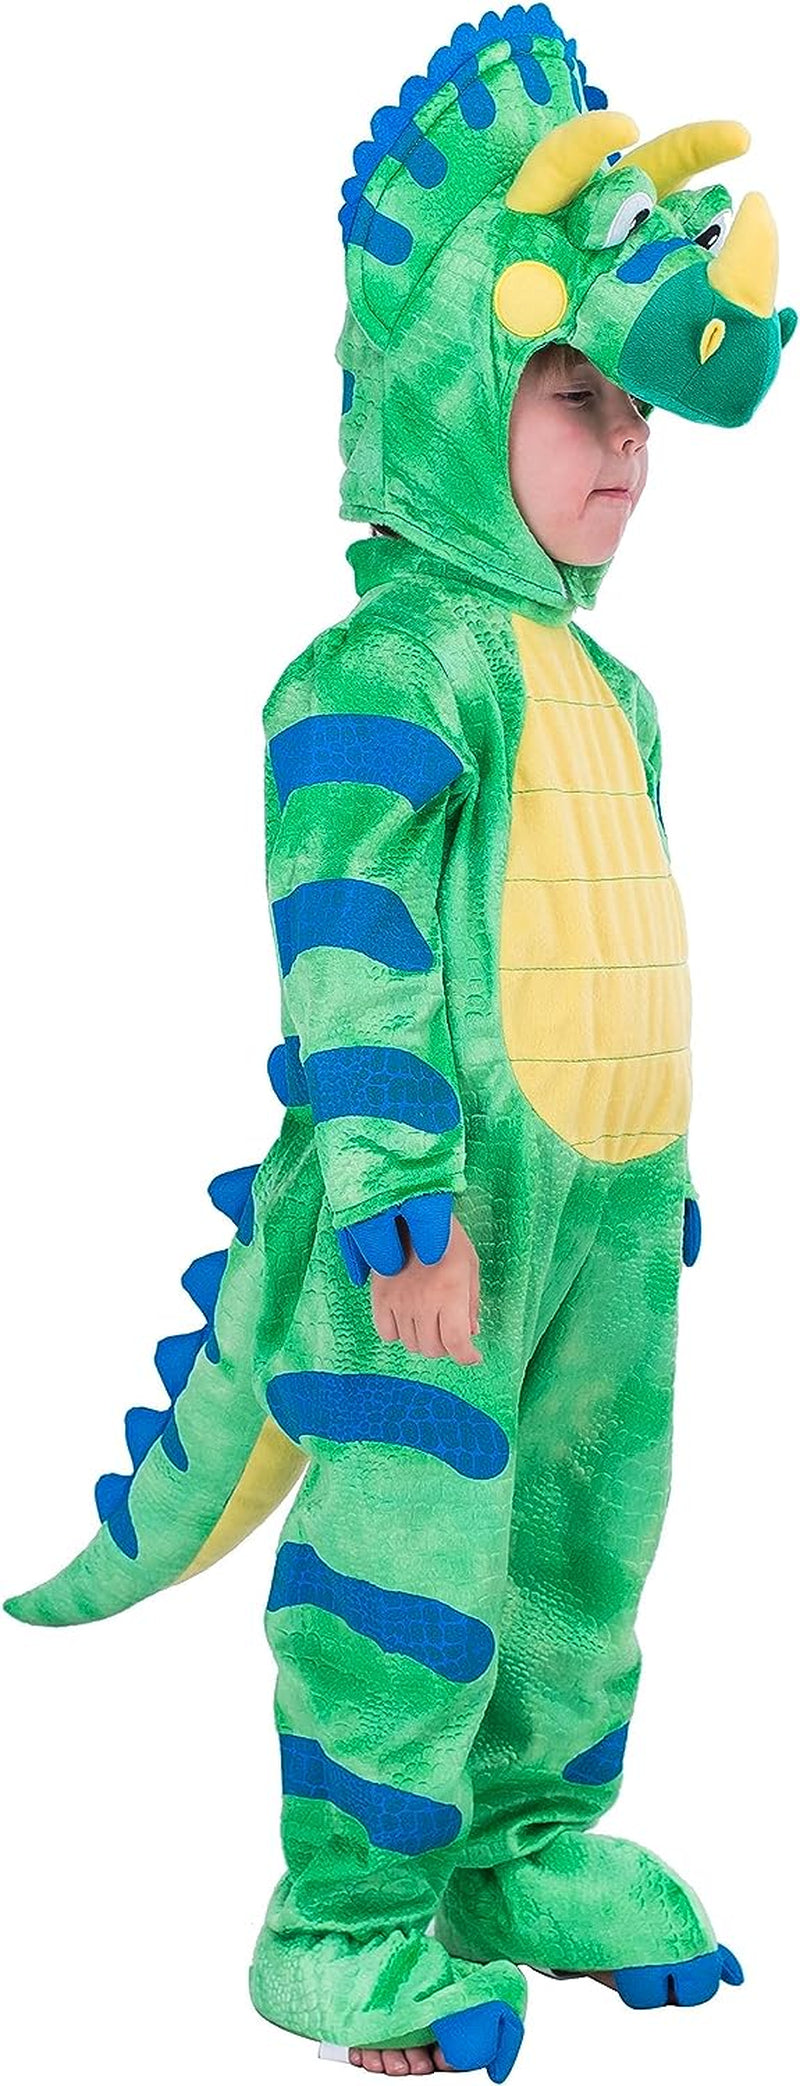 Spooktacular Creations Green Triceratops Dinosaur Costume with Toy Egg for Kid Halloween Dress up Dino Themed Pretend Party (3T (3-4 Yrs))  Joyin Inc   